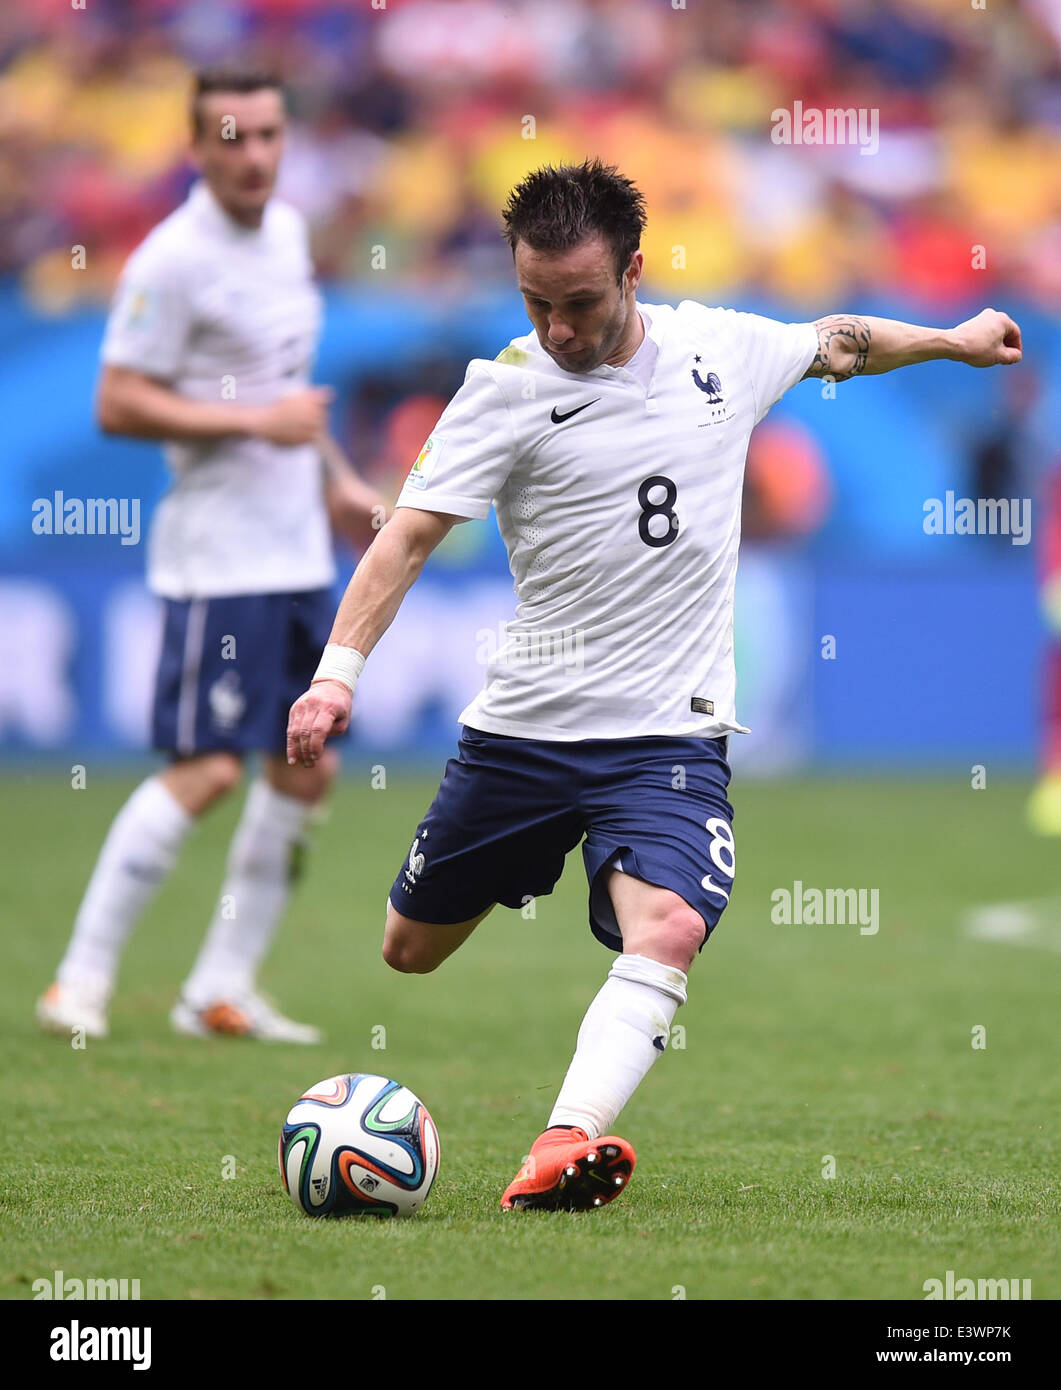 Brasilia, Brazil. 30th June, 2014. Mathieu Valbuena of France in action during the FIFA World Cup 2014 round of 16 match between France and Nigeria at the Estadio National Stadium in Brasilia, Brazil, on 30 June 2014. Credit:  dpa picture alliance/Alamy Live News Stock Photo